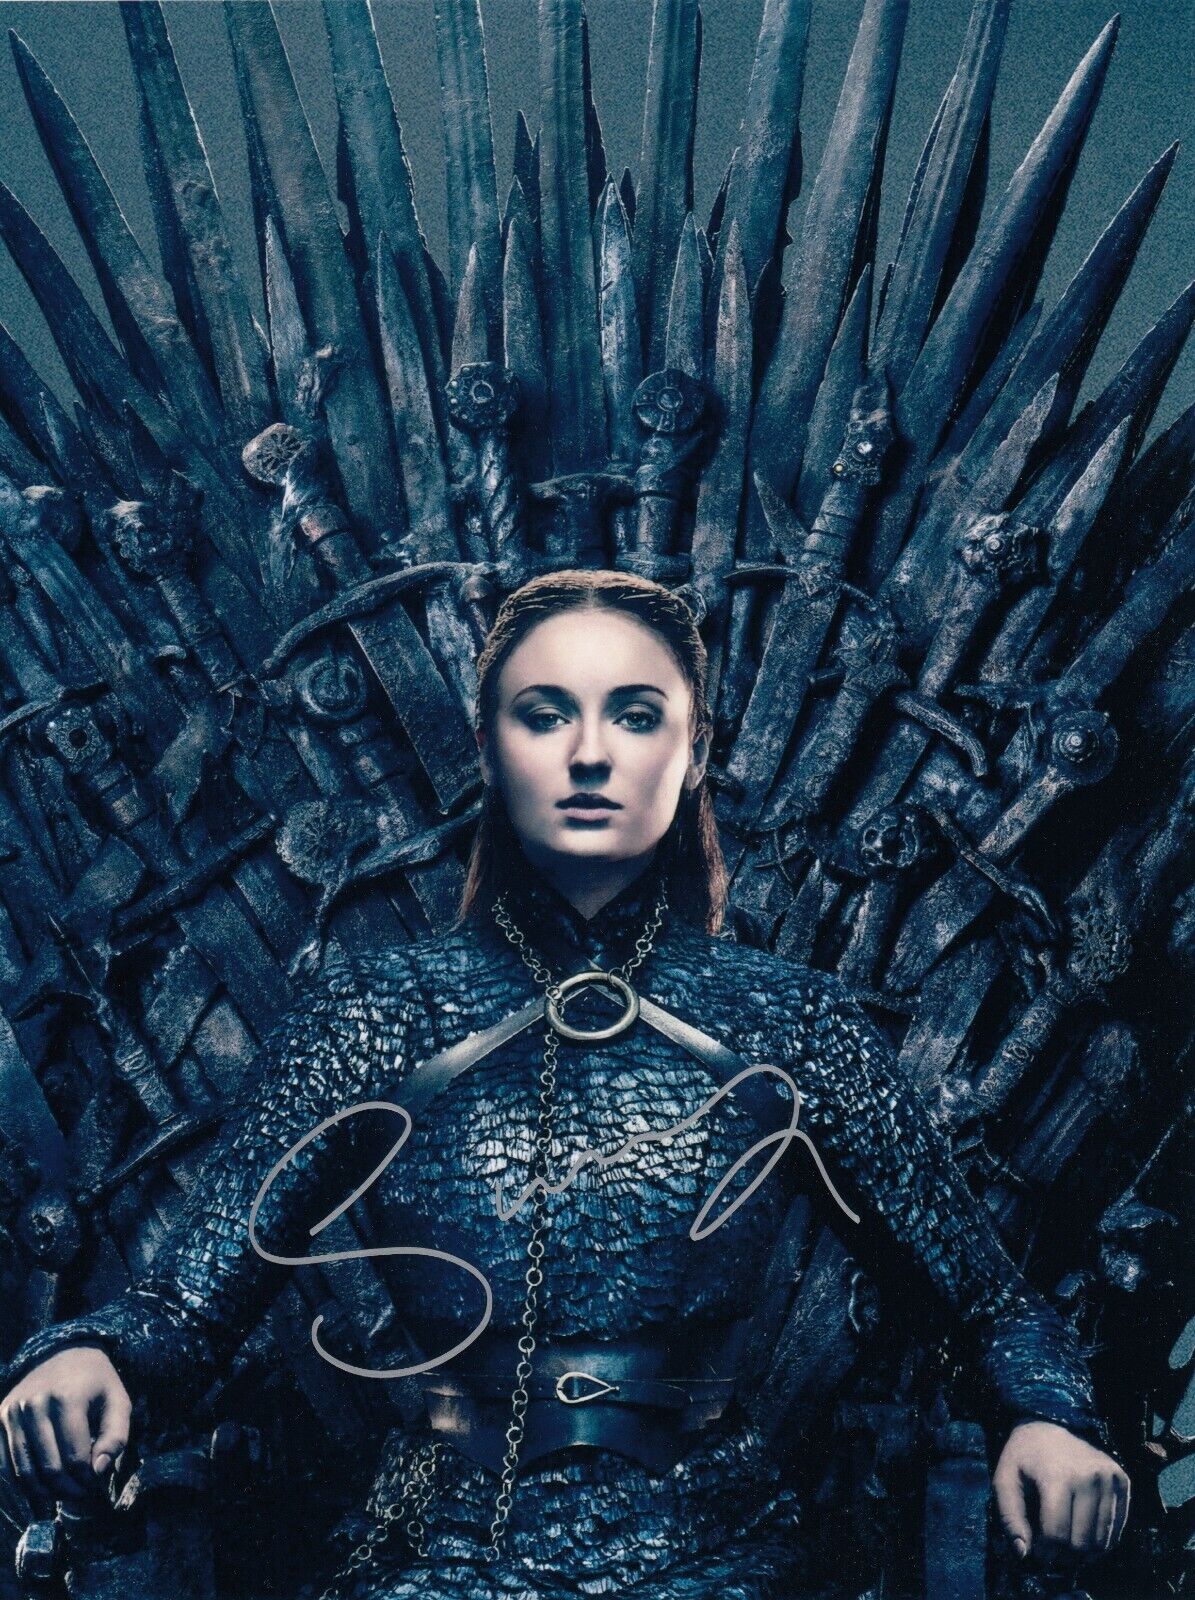 Sophie Turner Signed Auto 8 x 10 Photo Poster paintinggraph